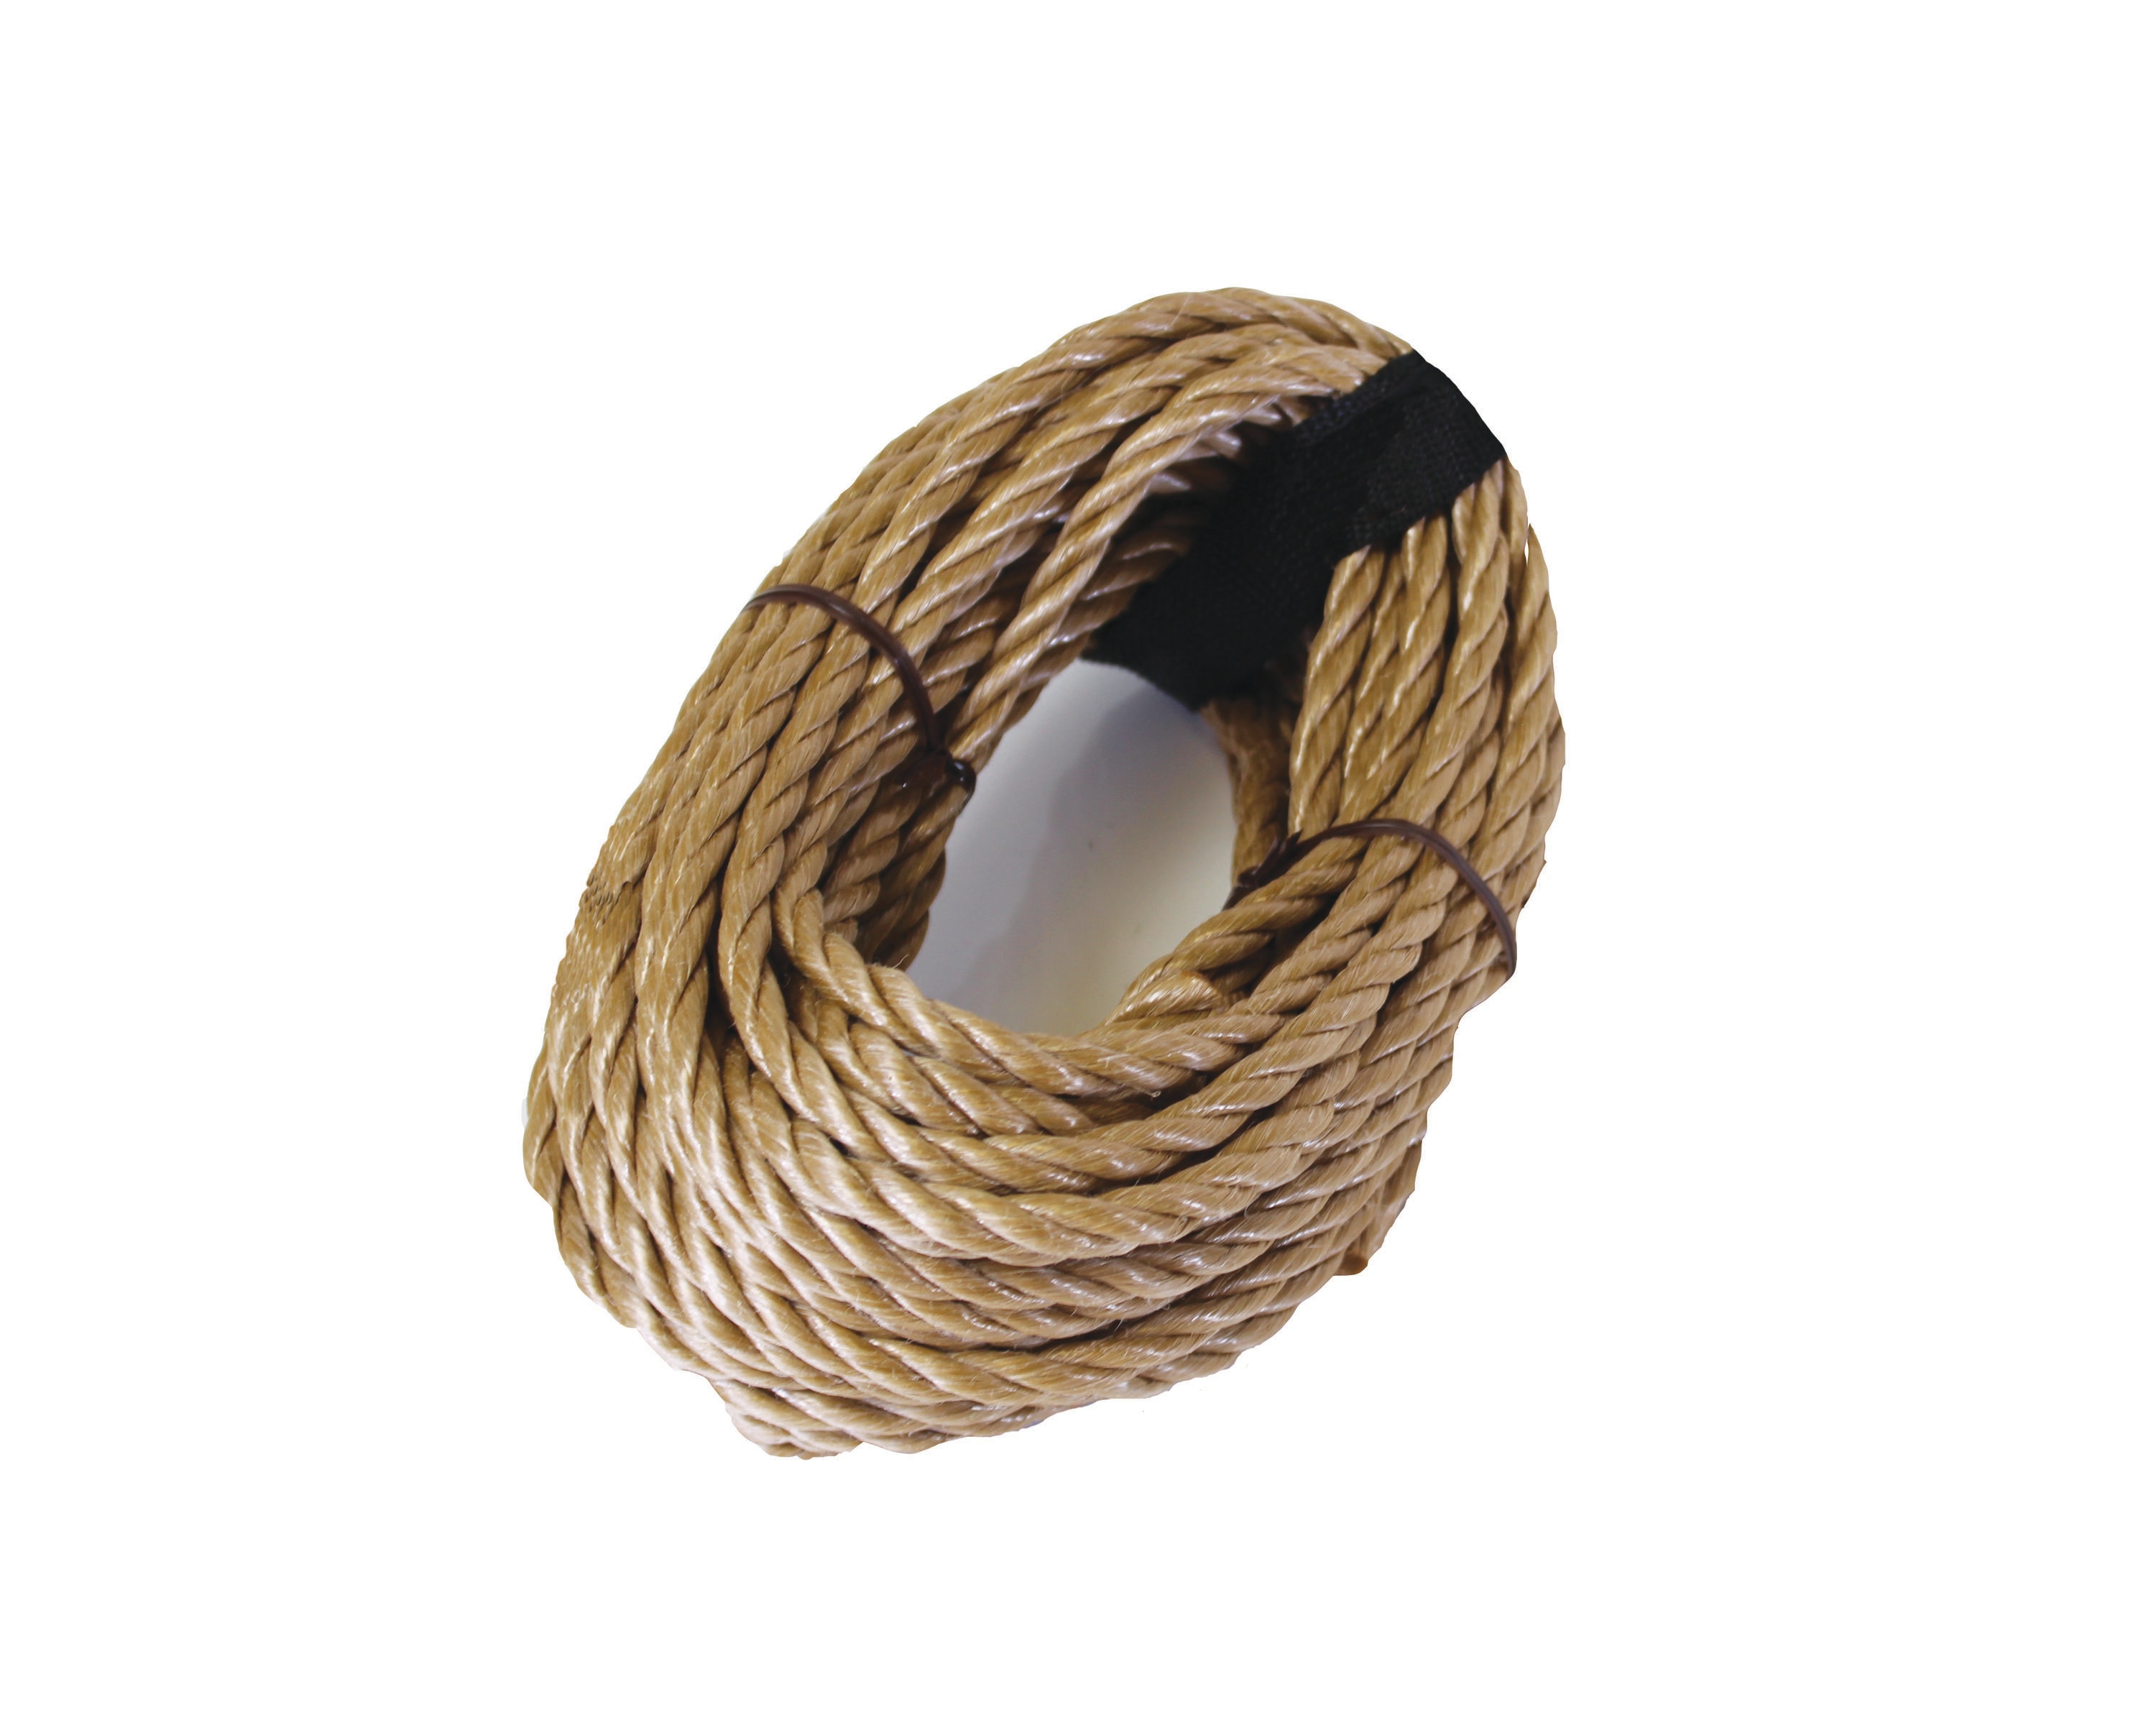 50 Foot Long Packaged Rope at